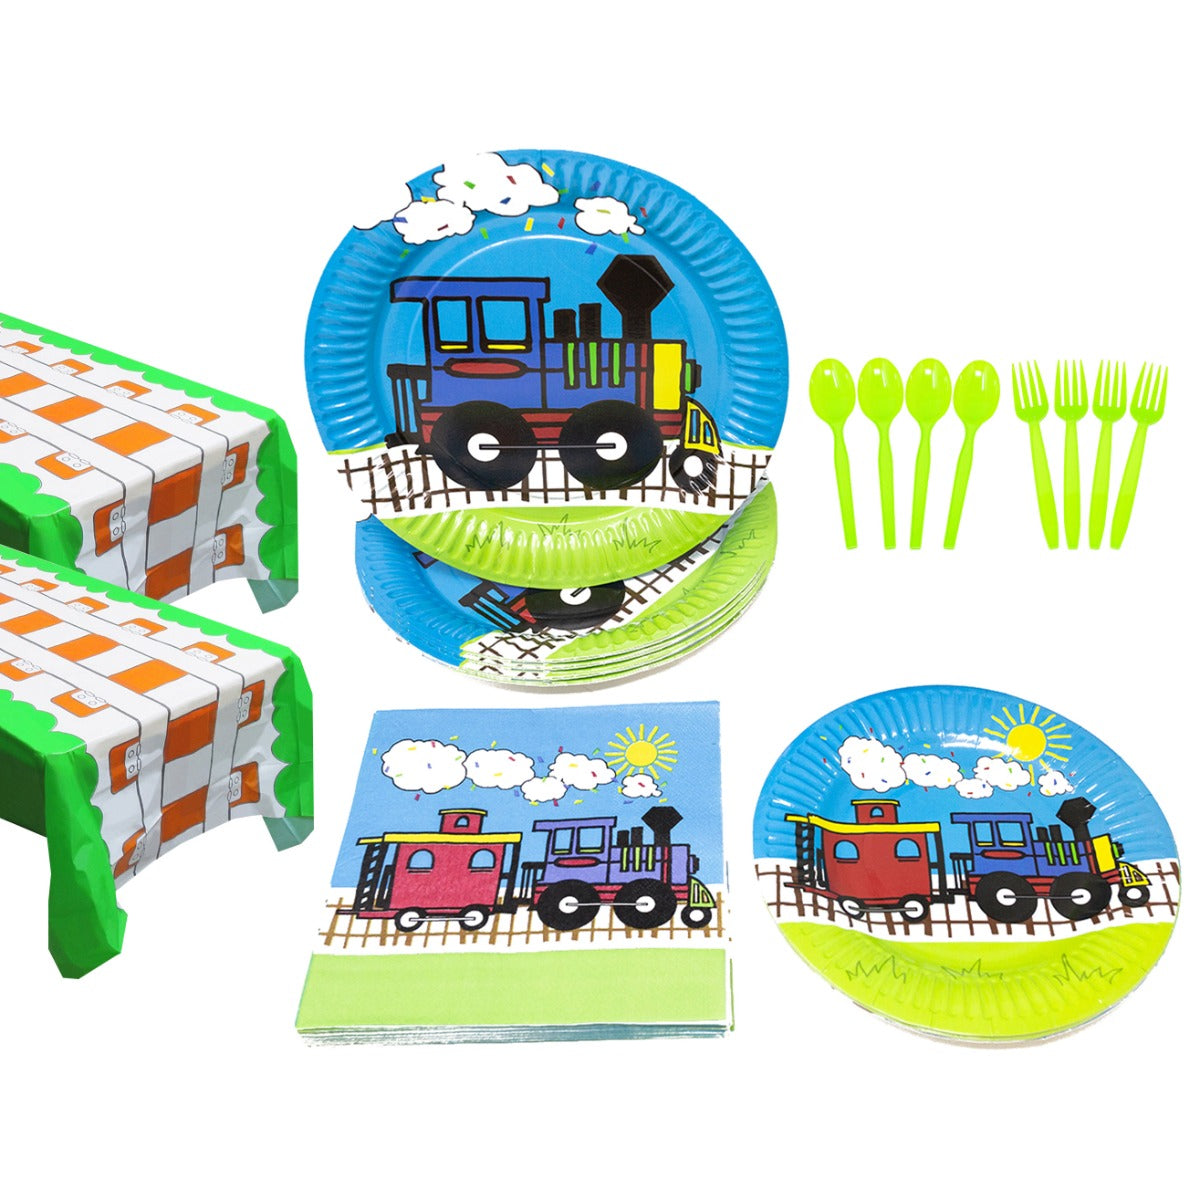 train birthday party supplies
train party decorations
train birthday table cloth
train birthday theme
train birthday decor
train birthday party supplies for 2 year old
train birthday decorations